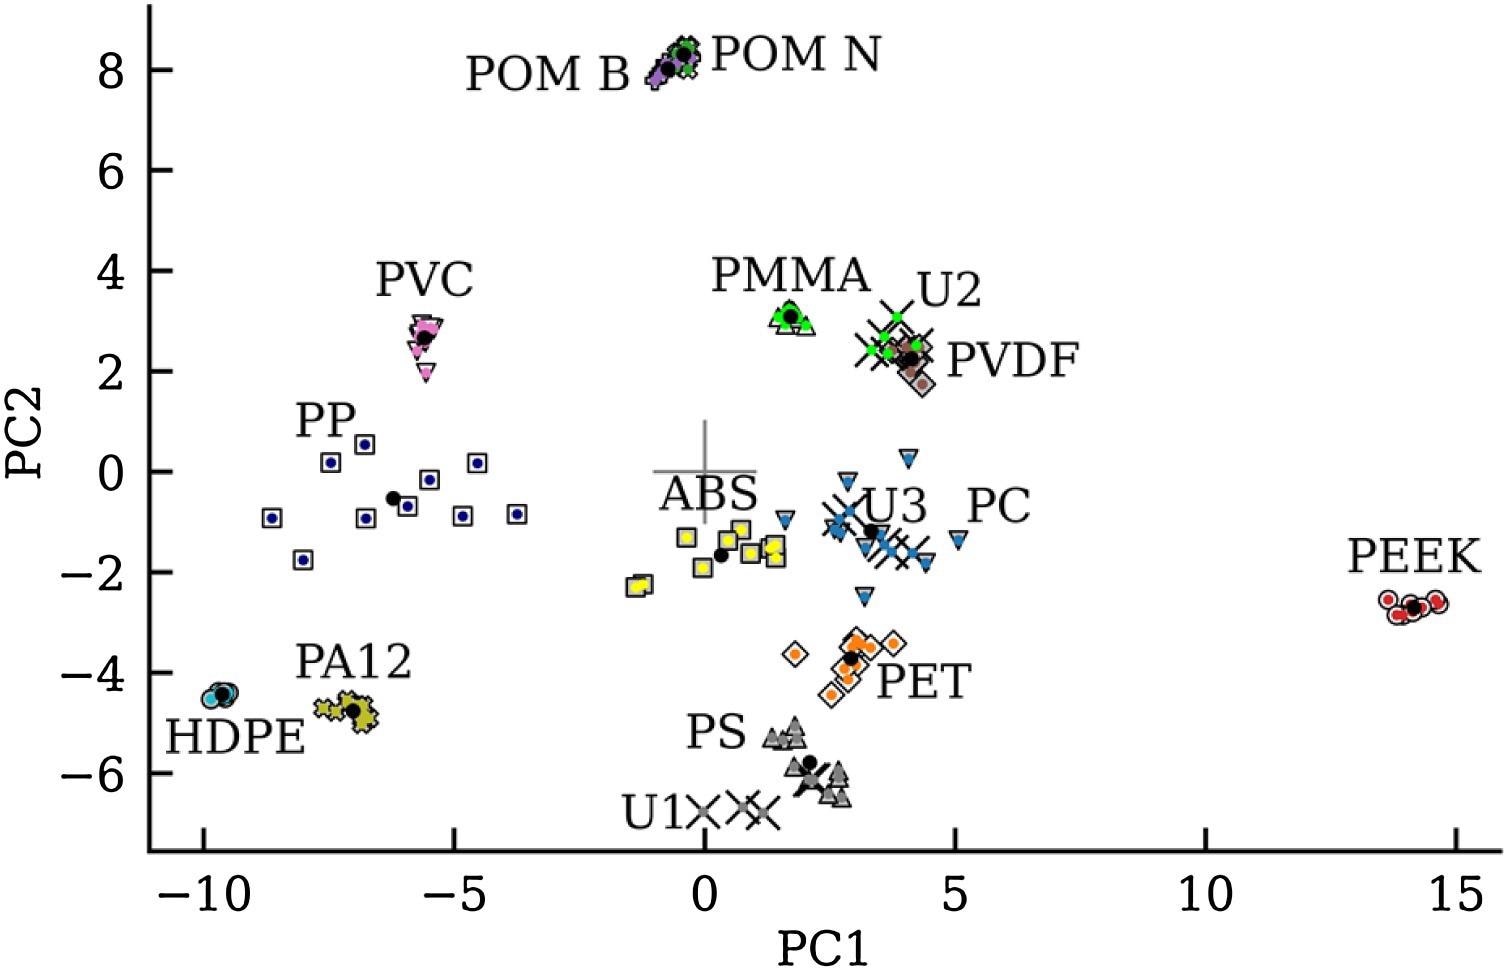 Score plot of the first and second principal component (PC1 and PC2, respectively) from the principal component analysis made on the Savitzky-Golay filtered HC spectra. Calculated cluster centers (black circle), the unknown samples (X), symbols are the known material type, and a color is assigned to the predicted material type.